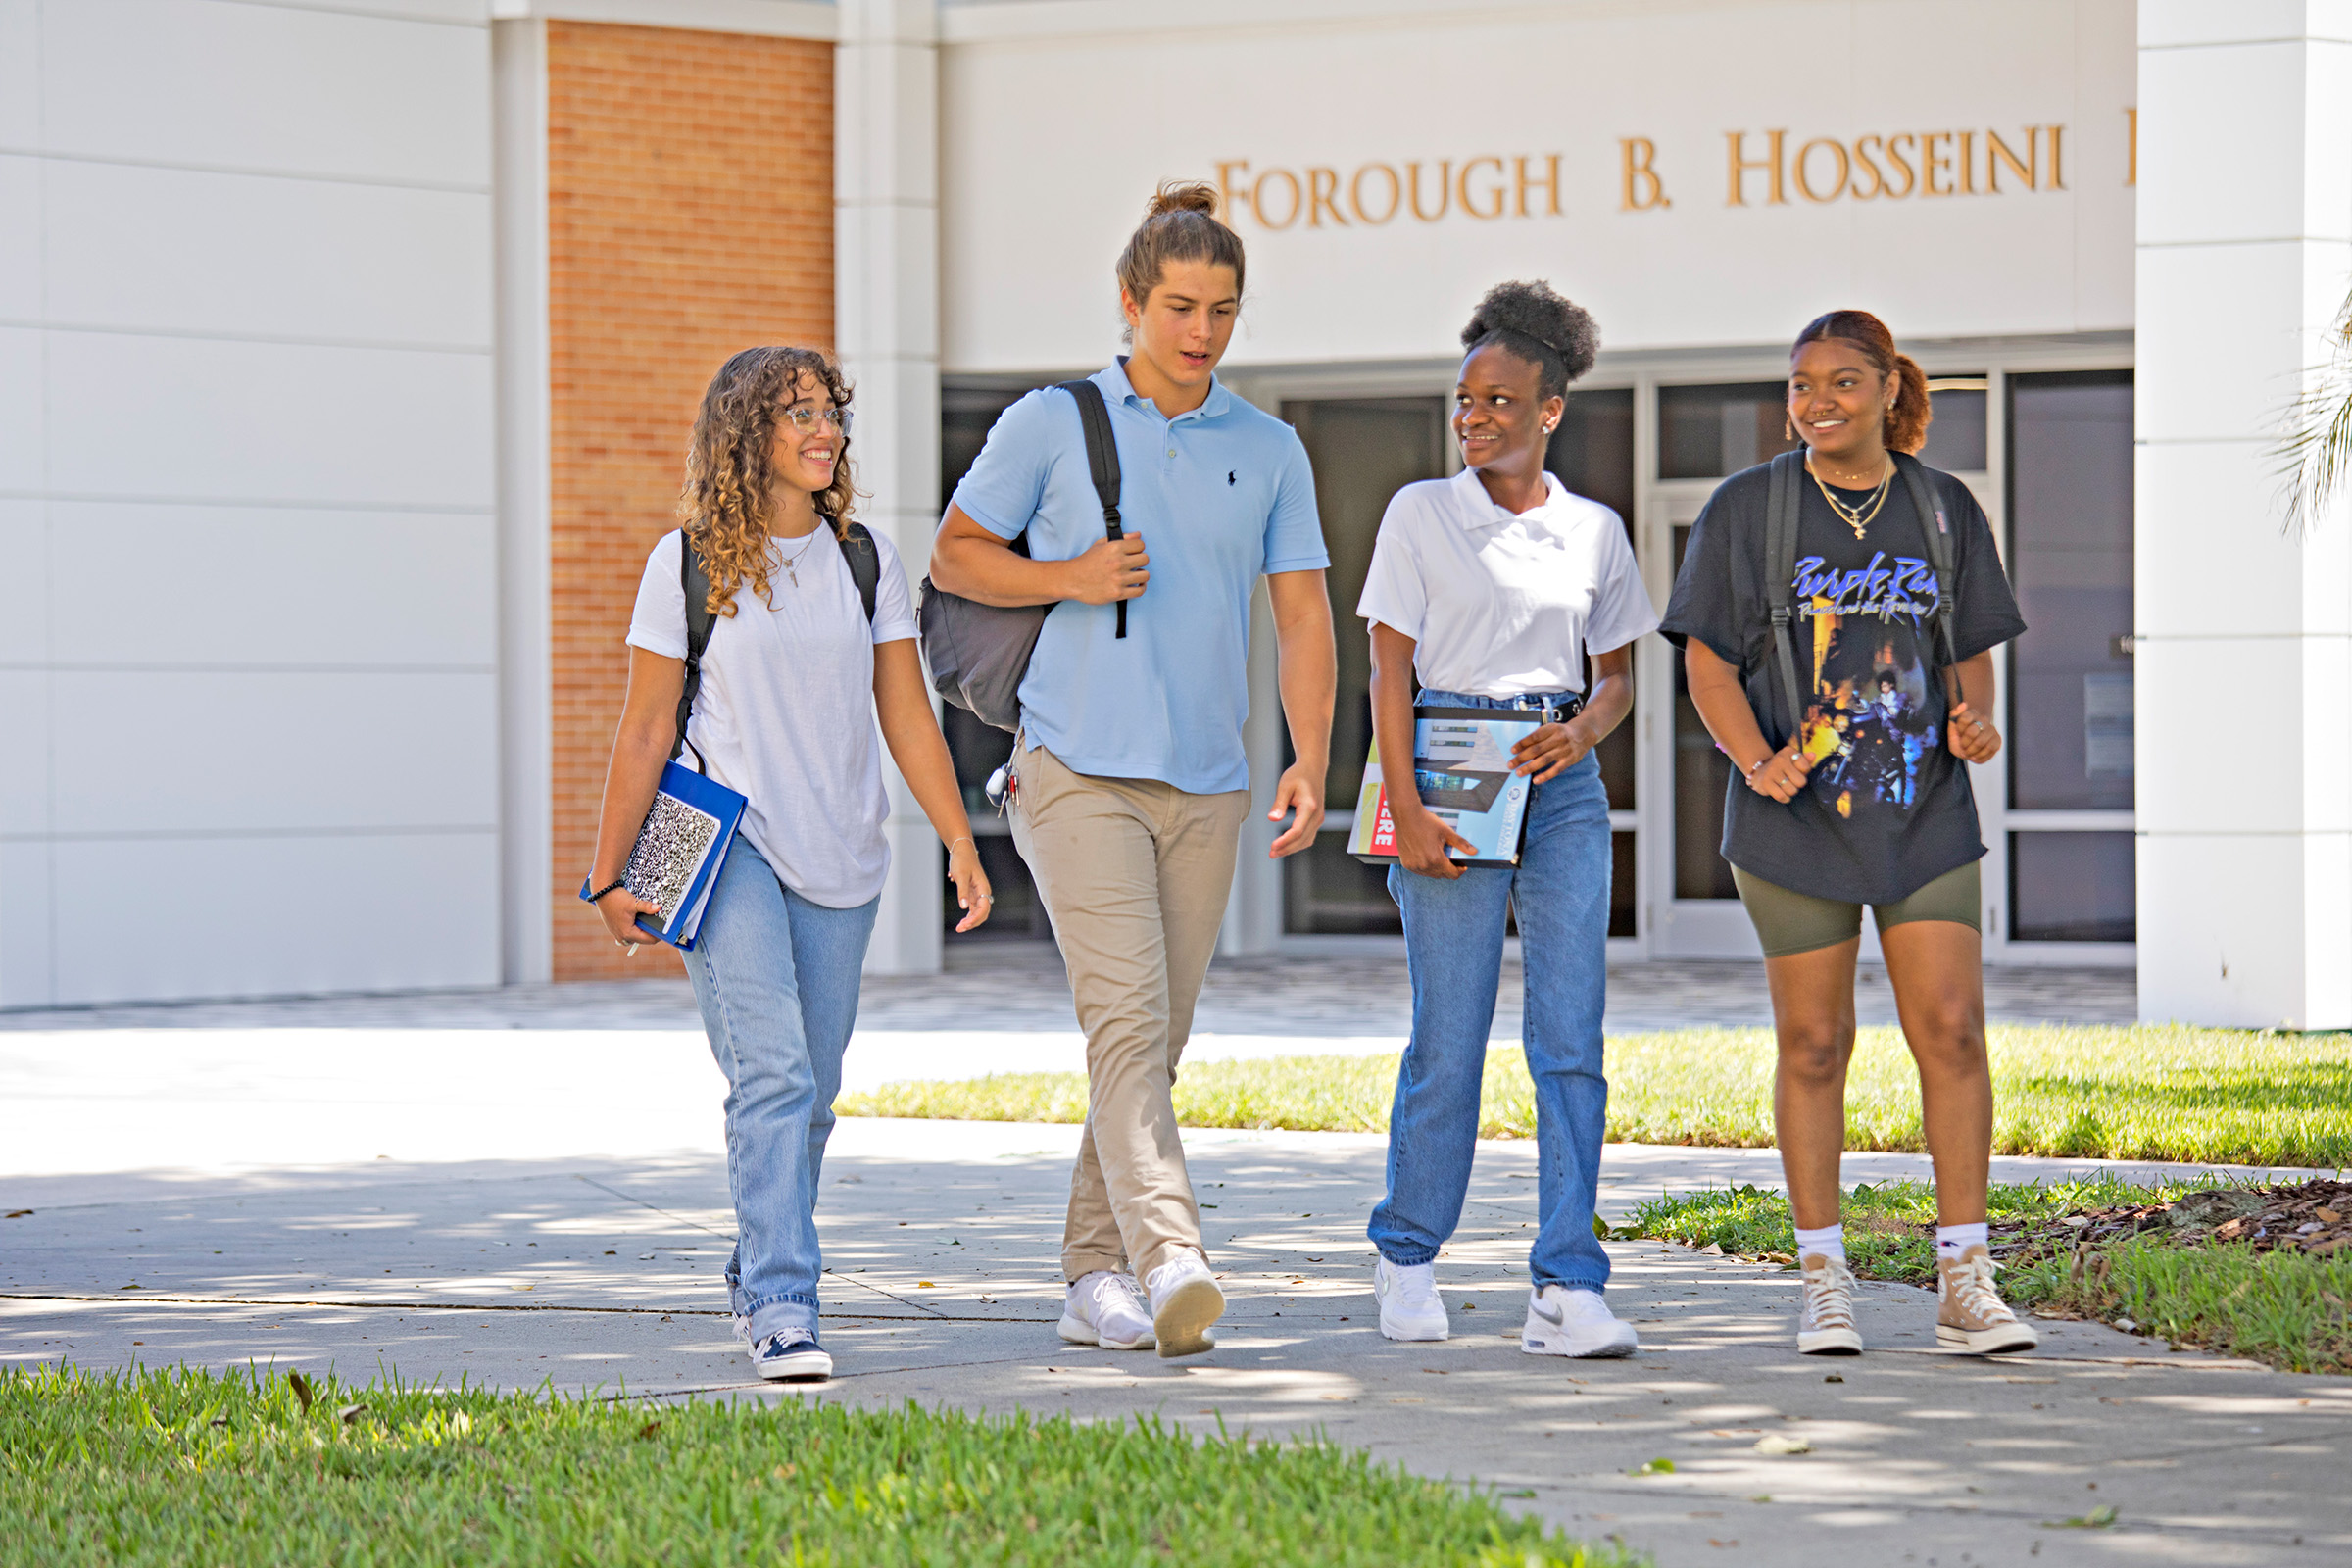 Students waling on campus